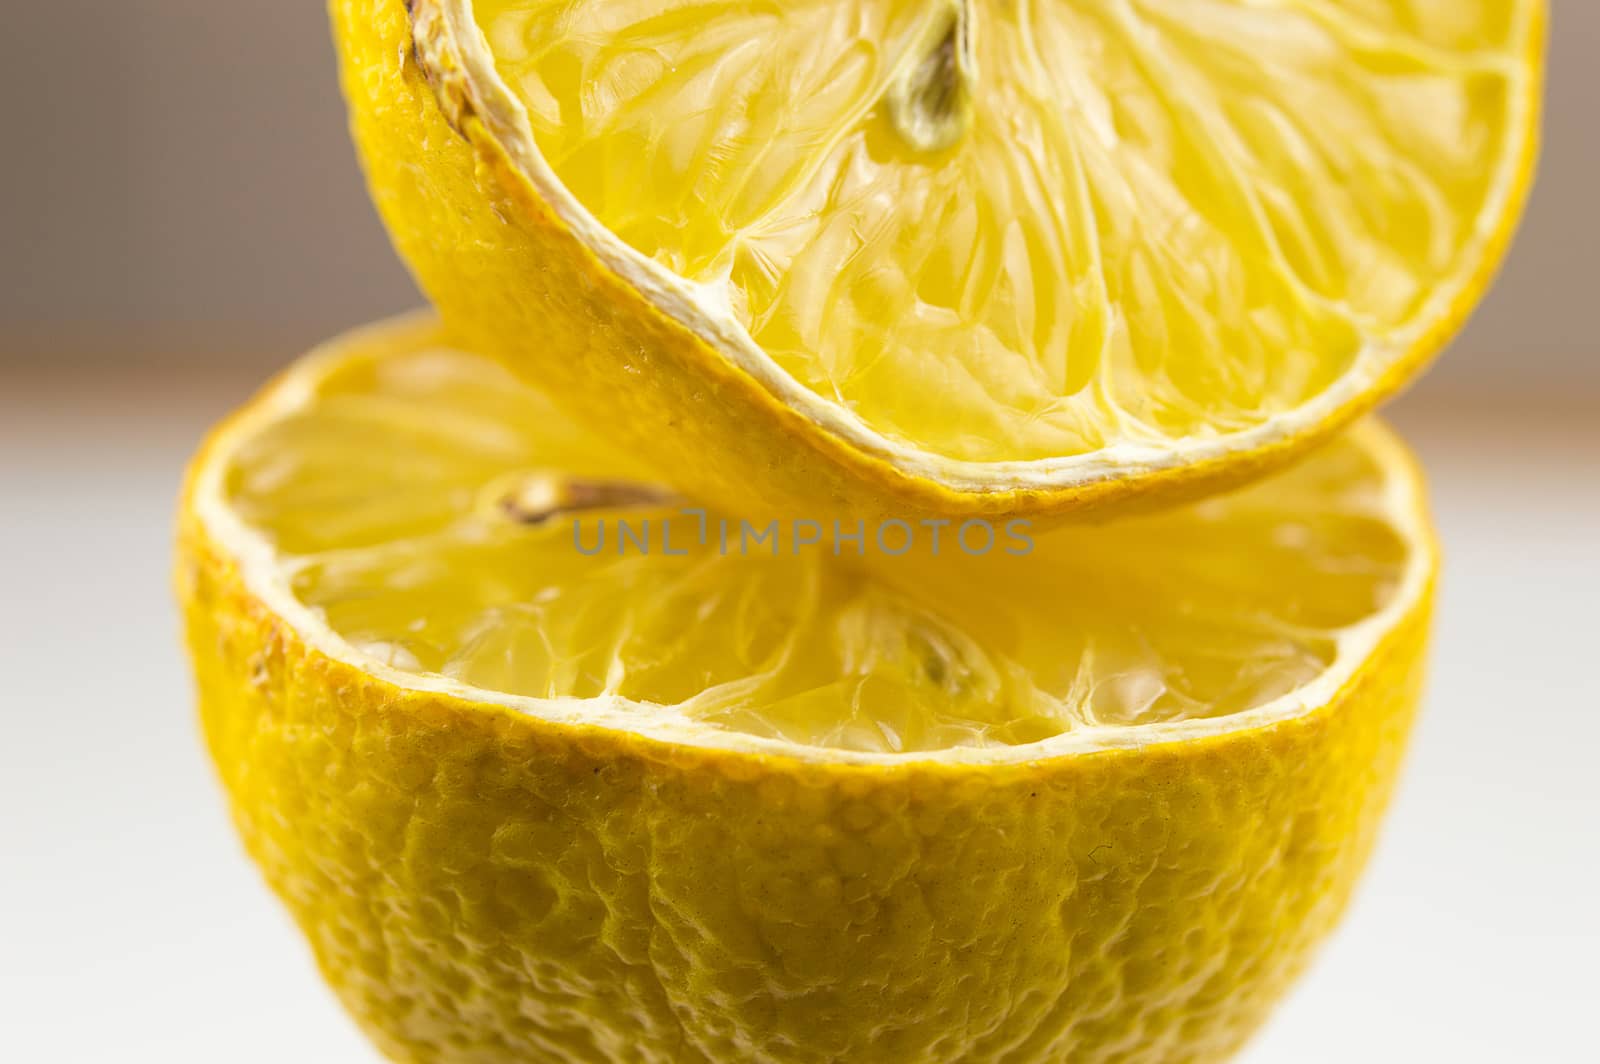 Two lemons macro view with blurred background